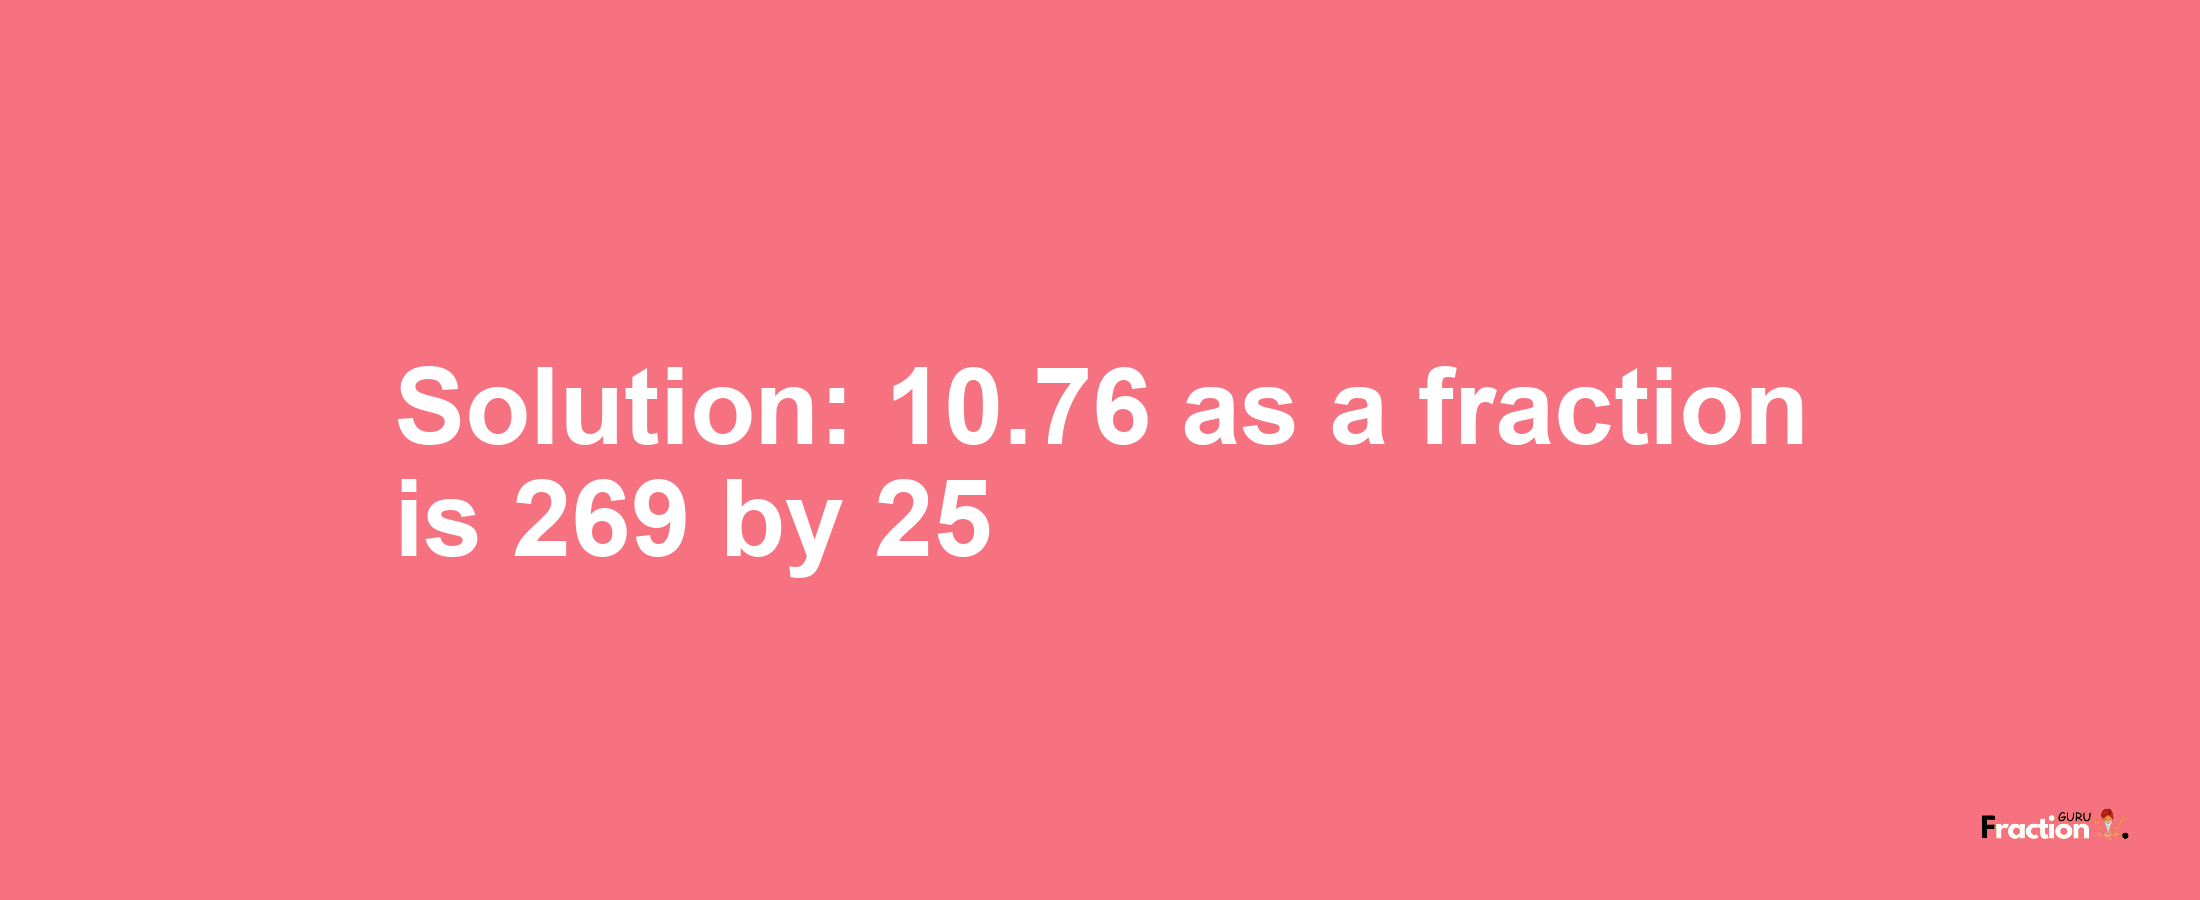 Solution:10.76 as a fraction is 269/25